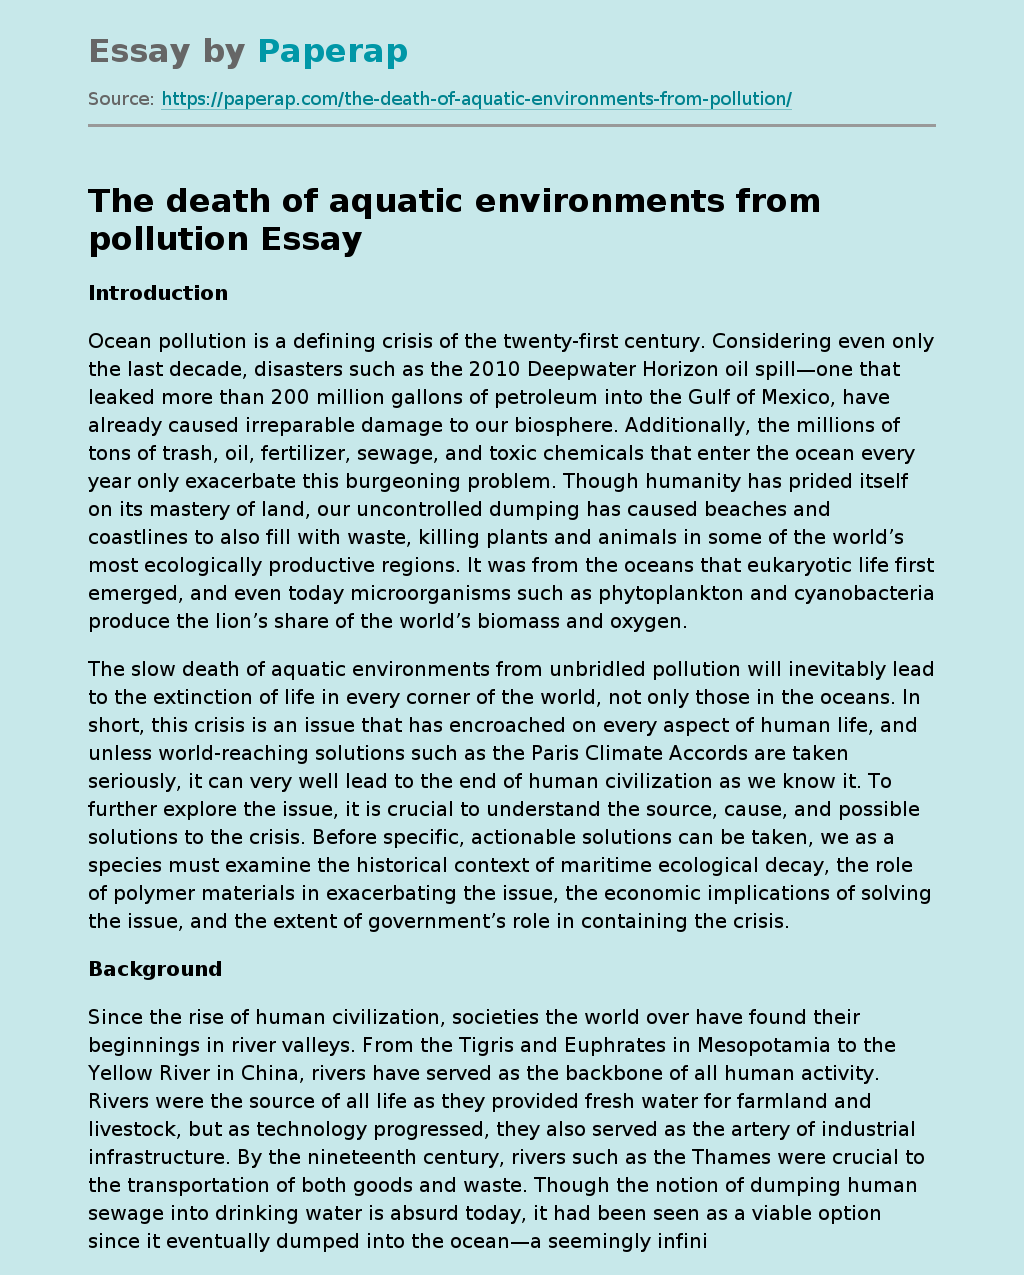 The death of aquatic environments from pollution